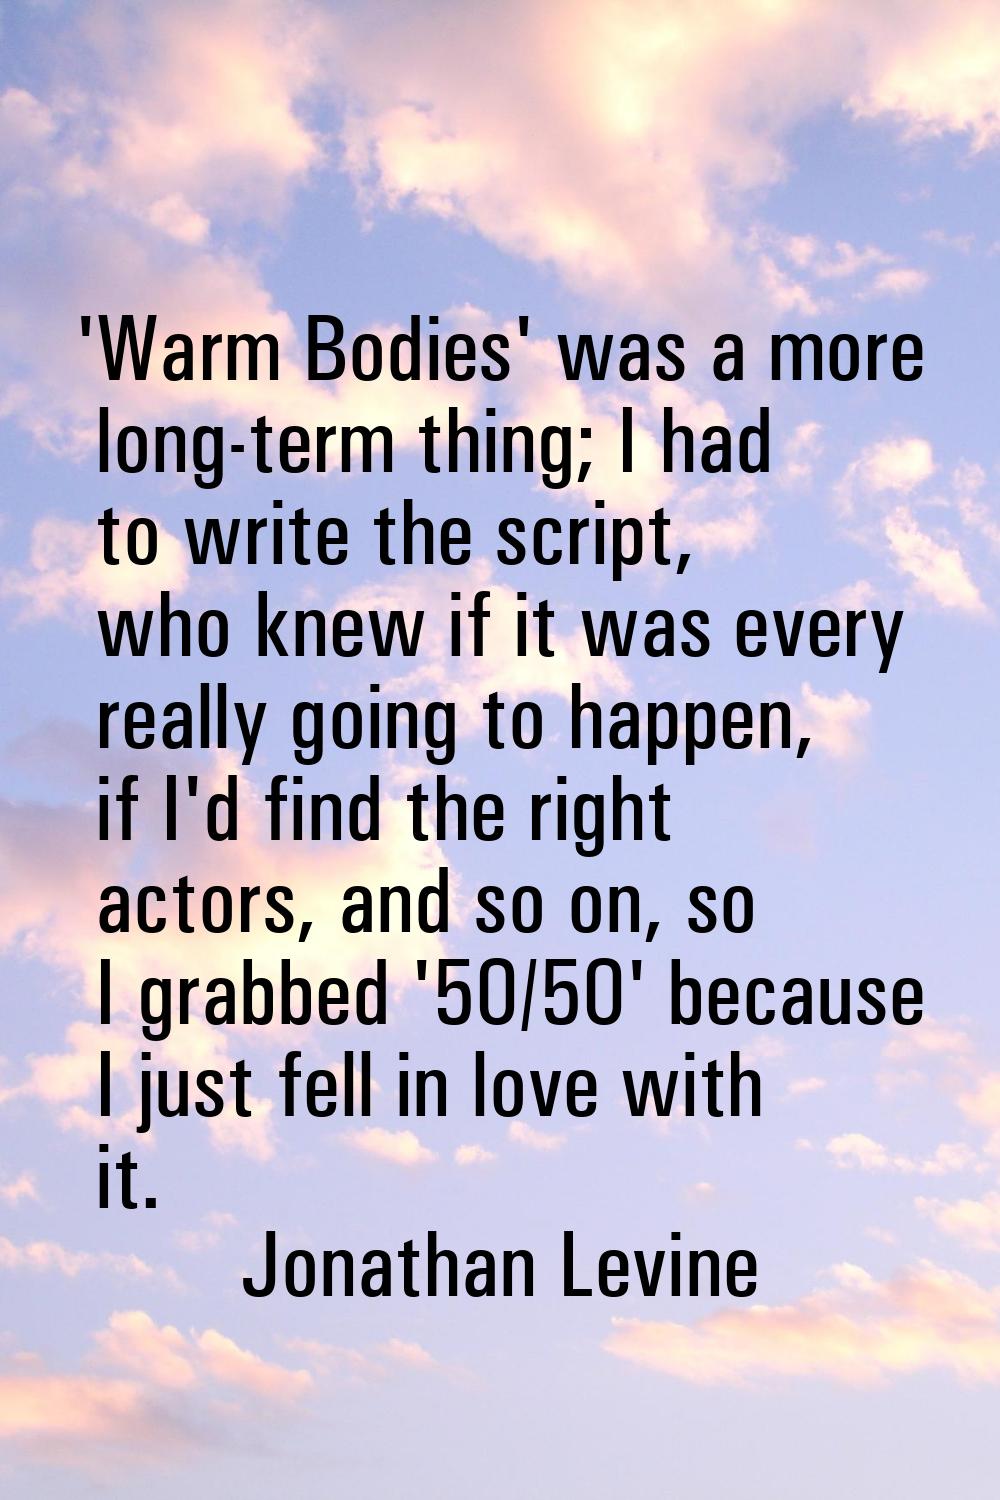 'Warm Bodies' was a more long-term thing; I had to write the script, who knew if it was every reall